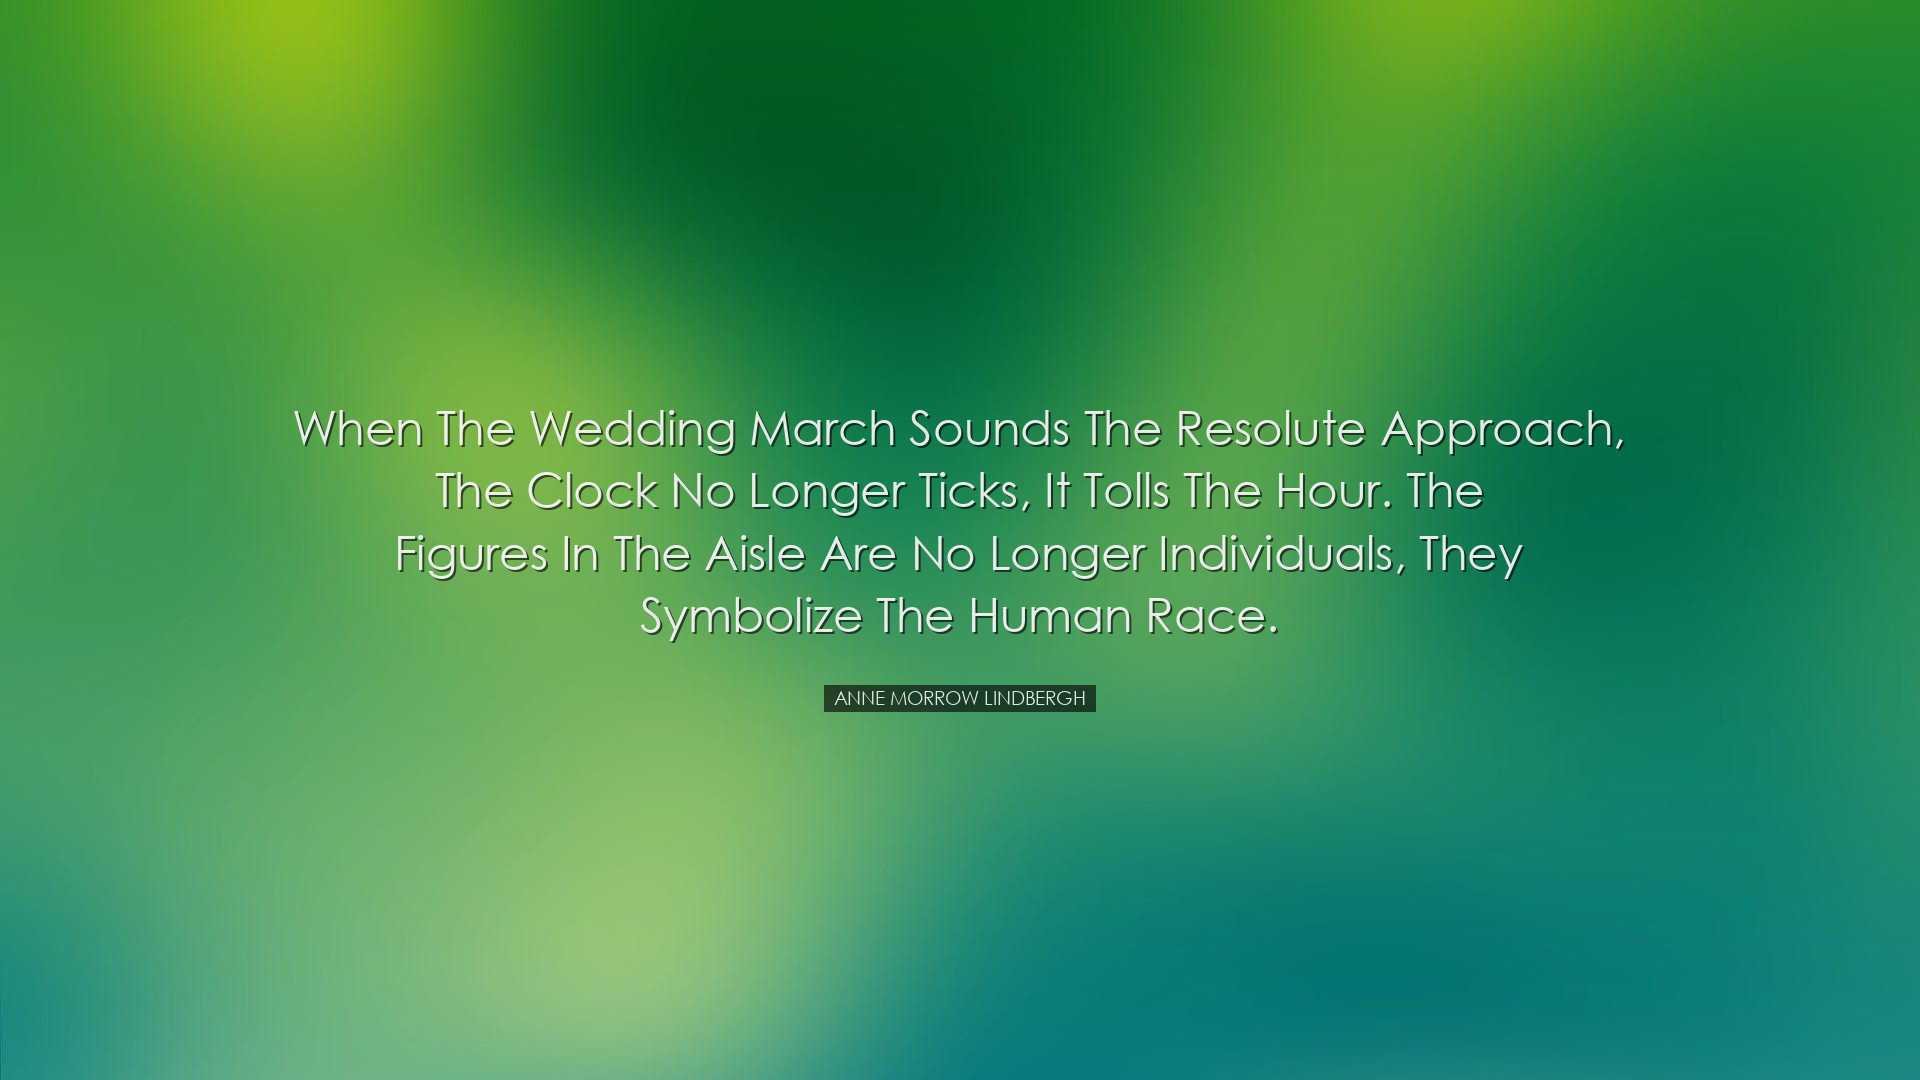 When the wedding march sounds the resolute approach, the clock no